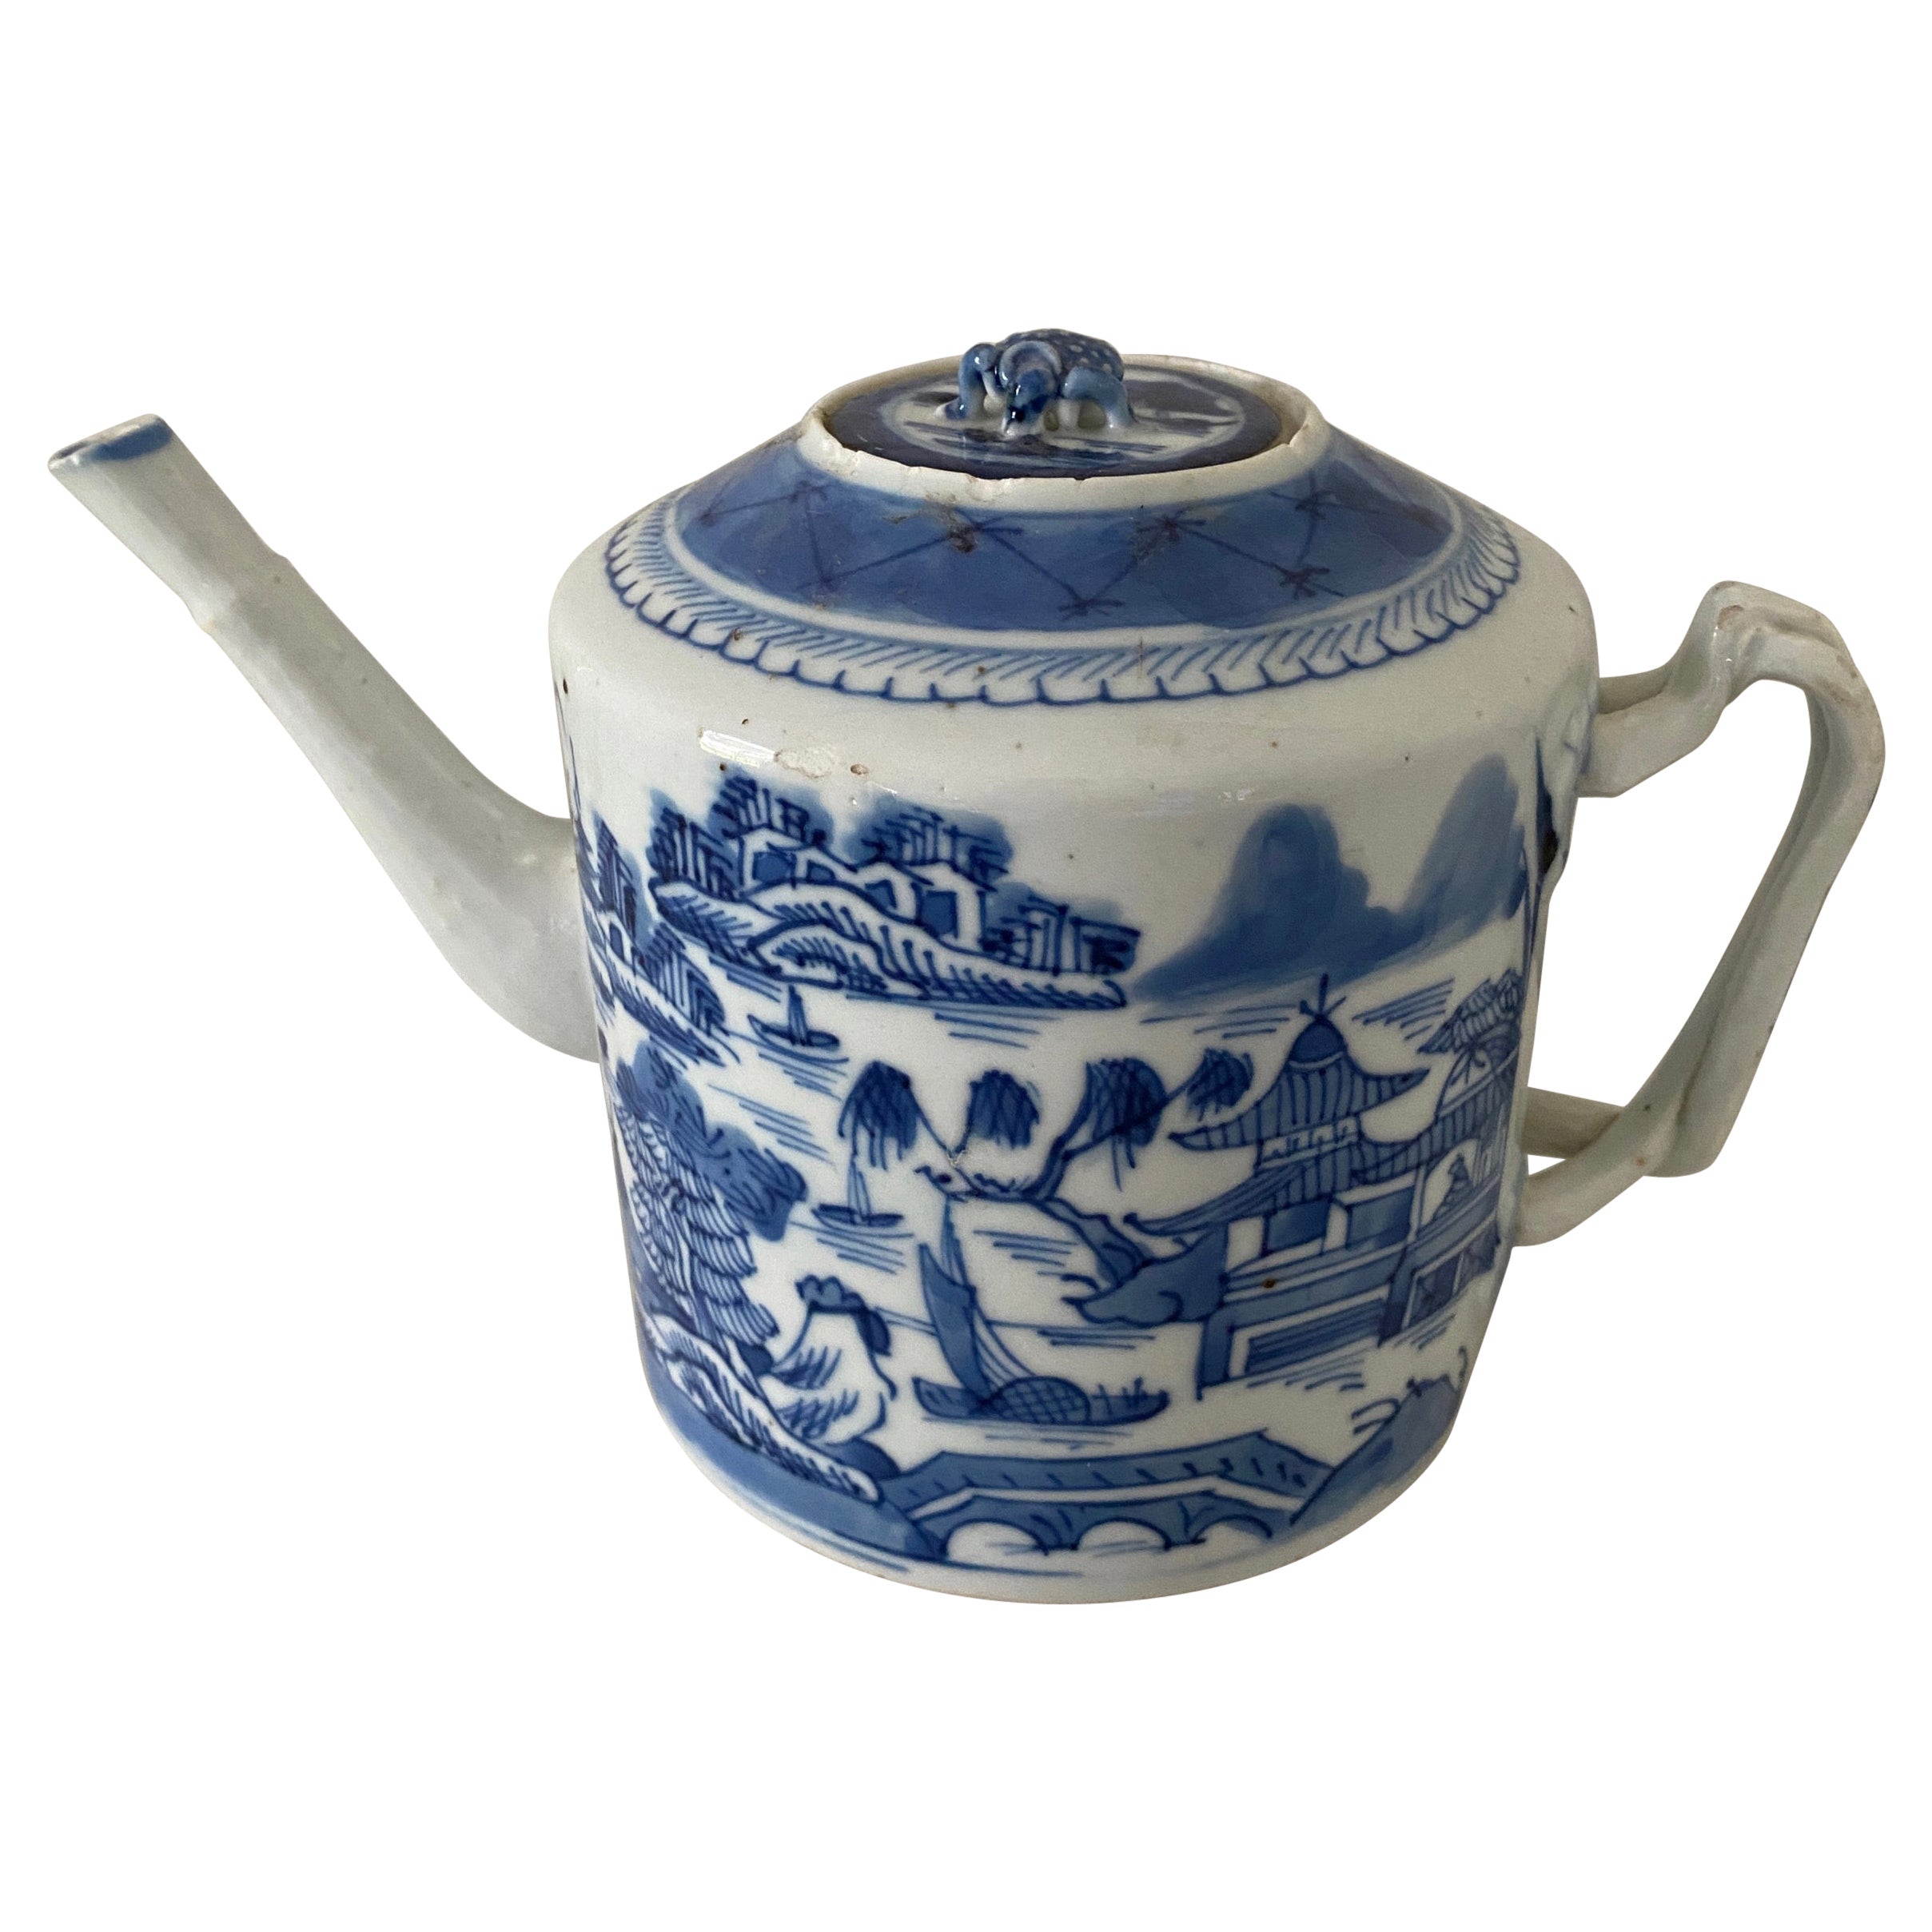 Antique Blue and White Chinese Teapot